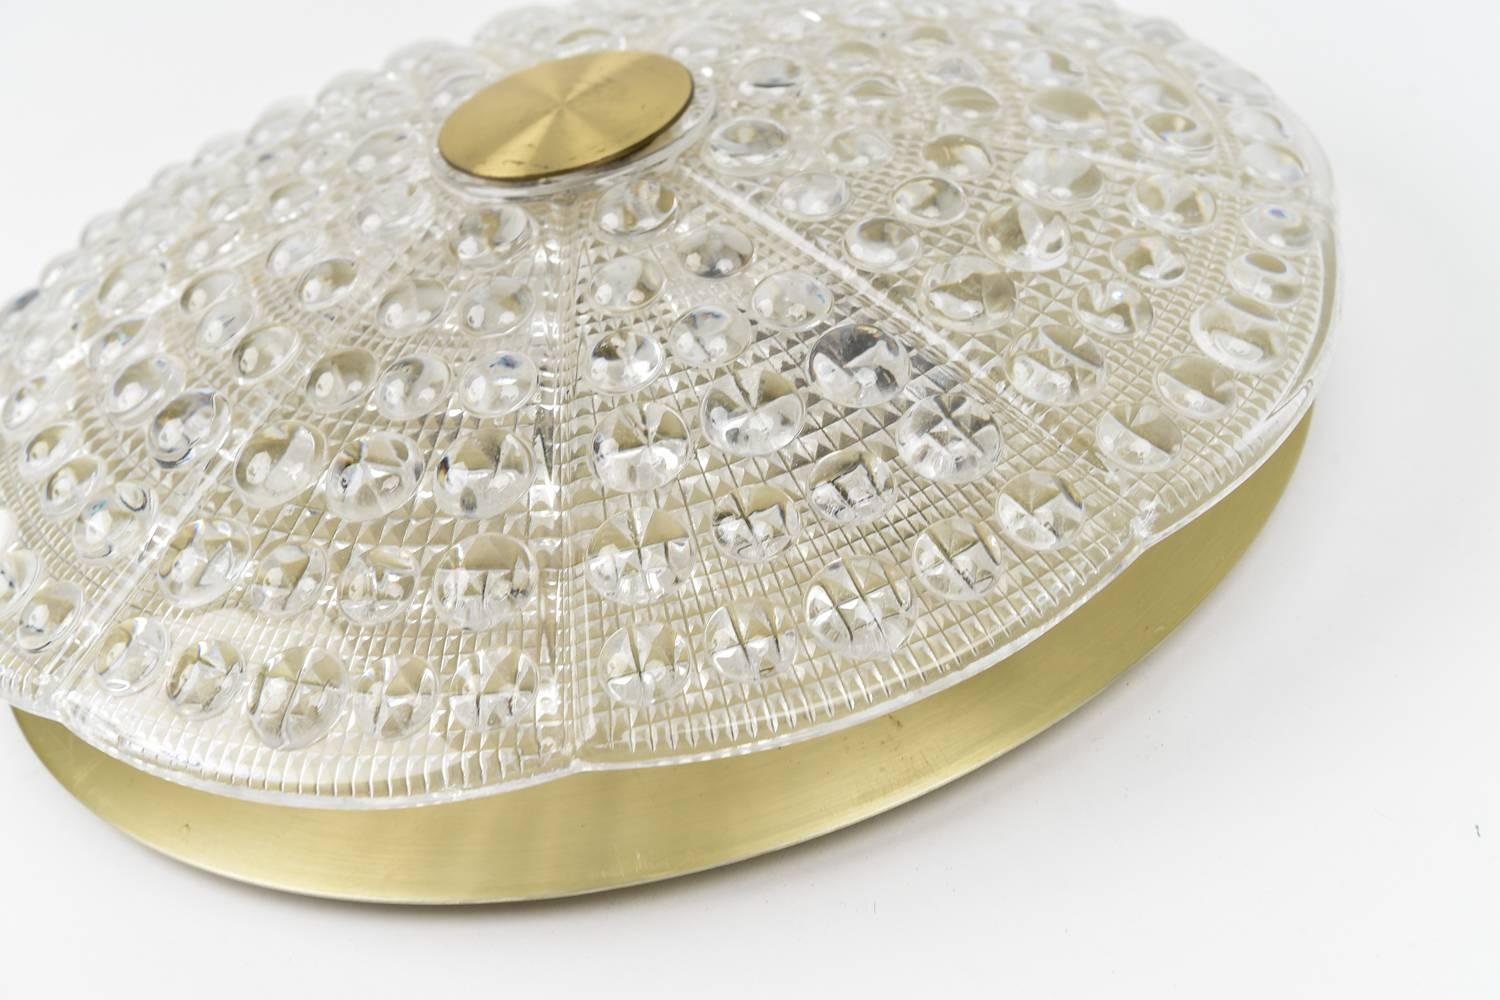 Orrefors textured crystal in round and diamond design with gilded brass backplate and round brass top cap. Designed by Carl Fagerlund, circa 1960s.